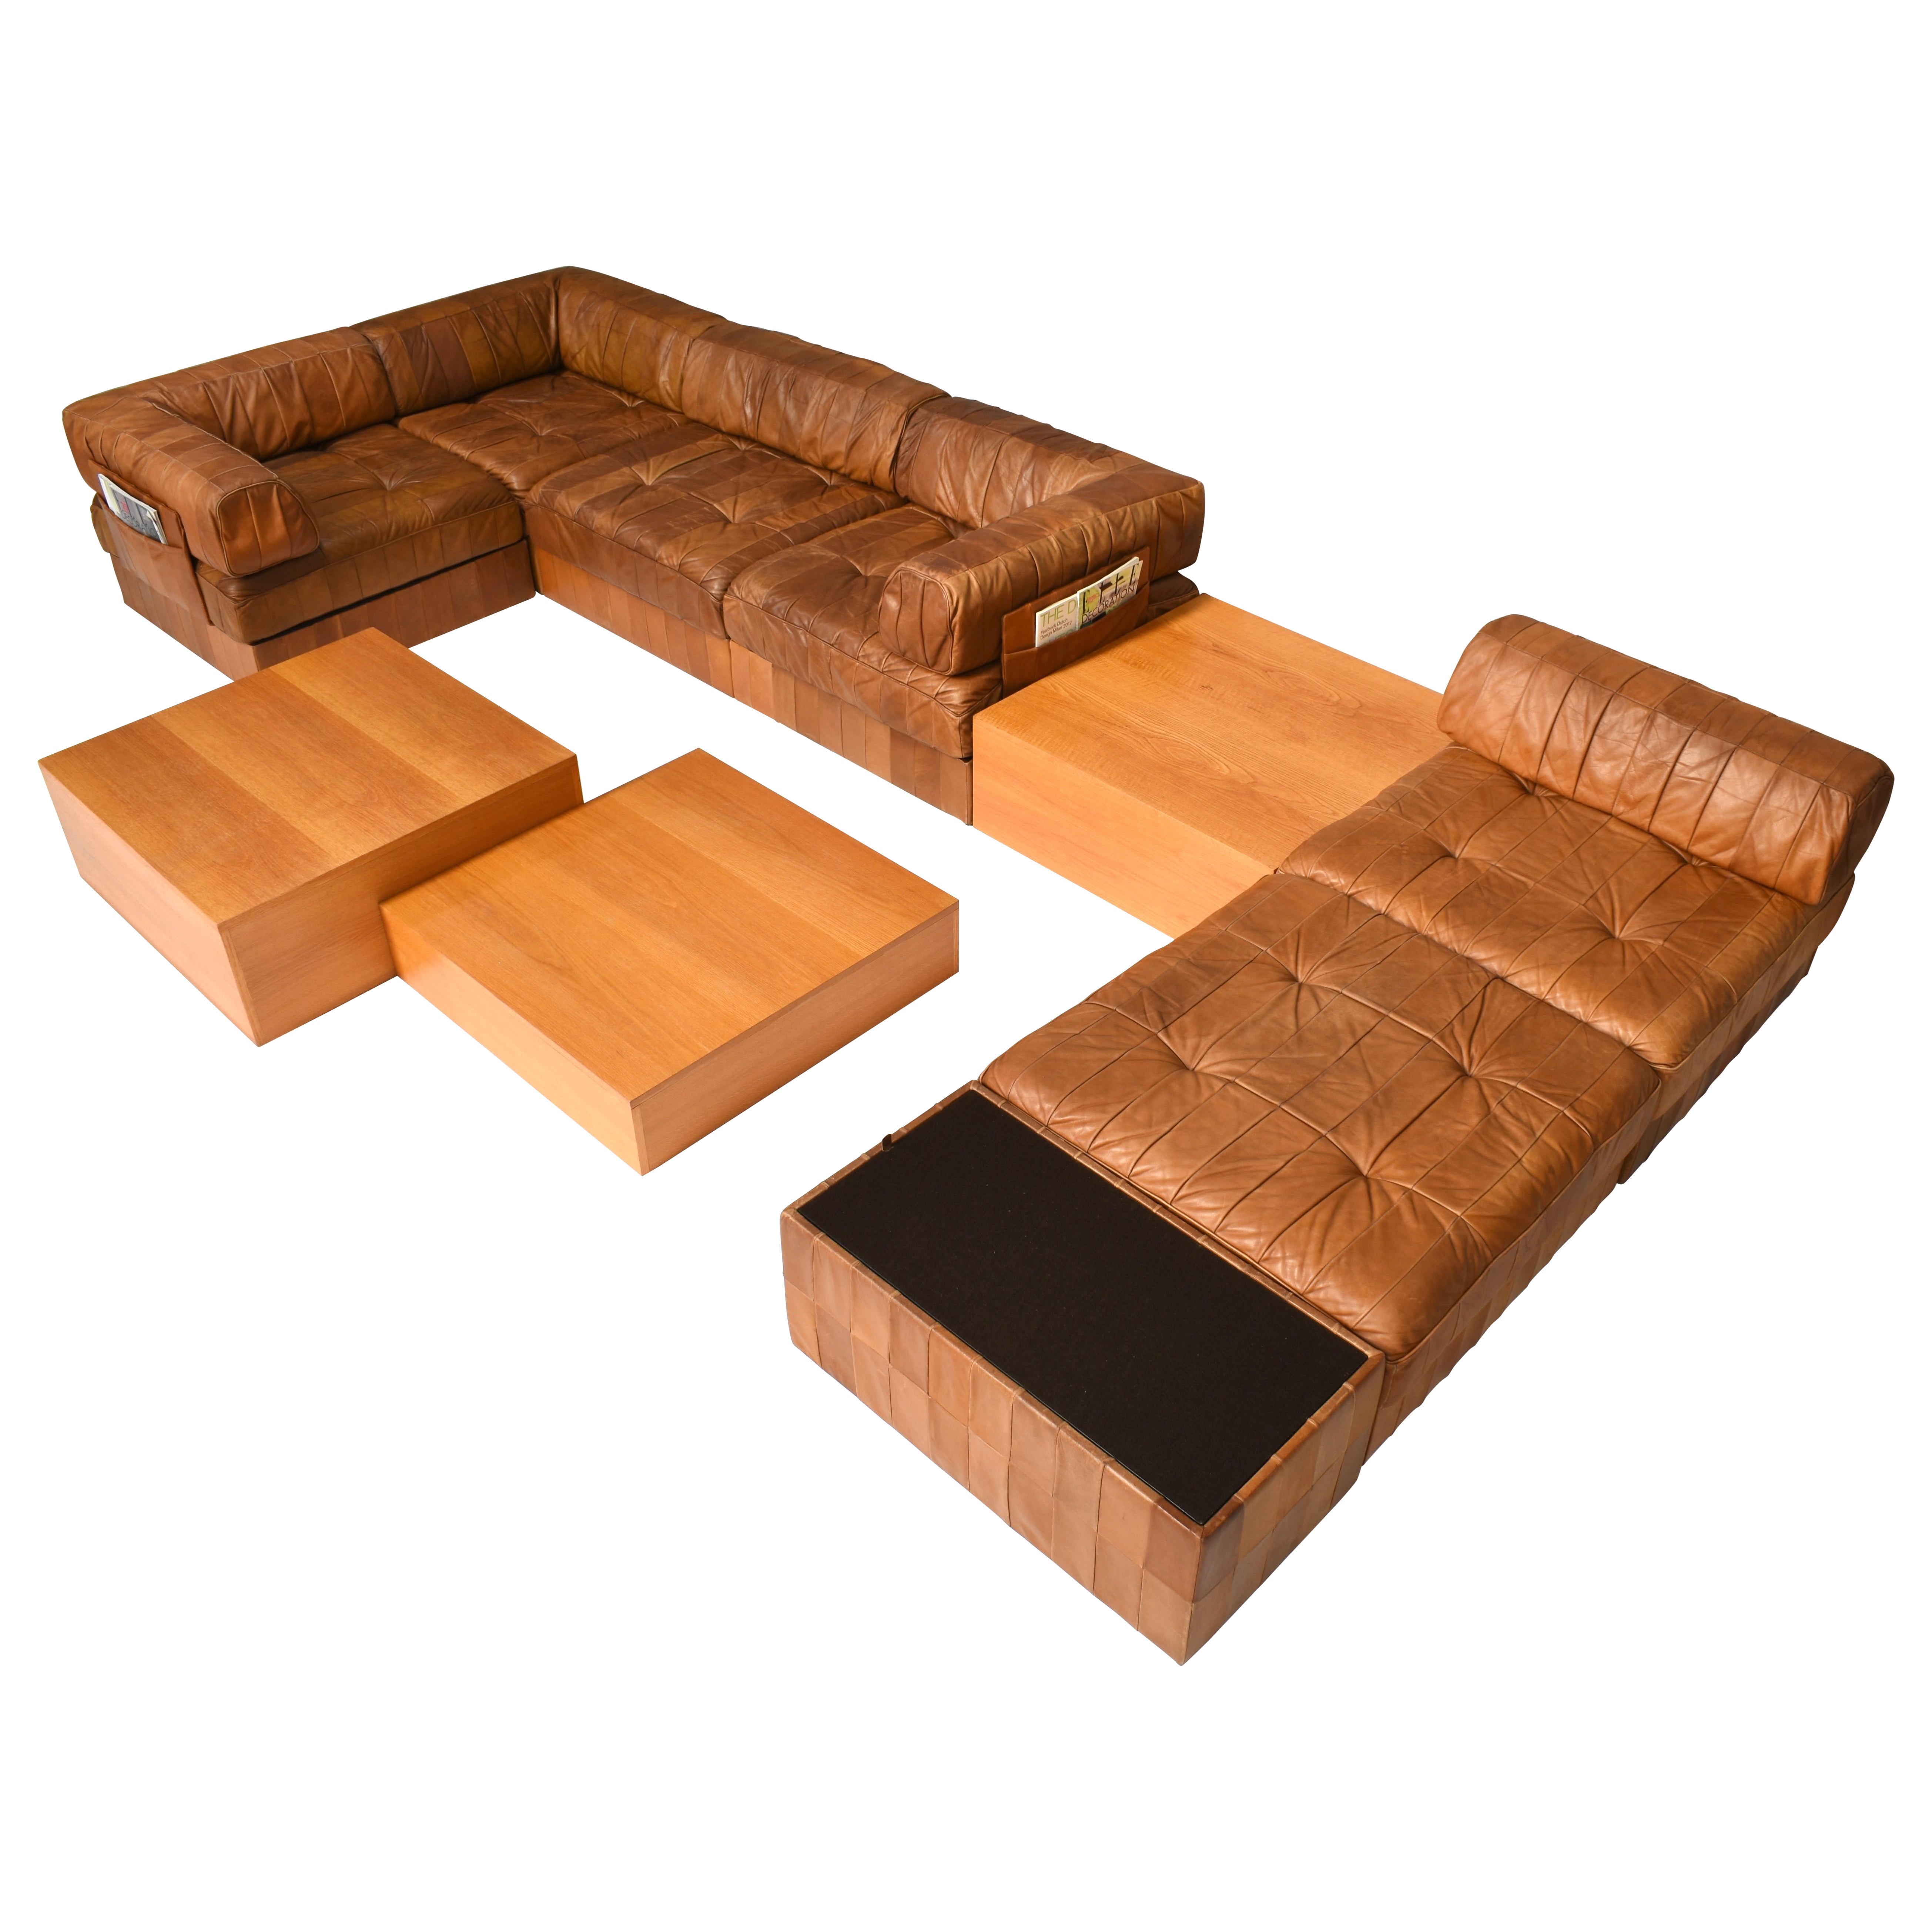 De Sede DS-88 Sectional Sofa in Cognac Brown Tan Leather, Switzerland, 1970's For Sale